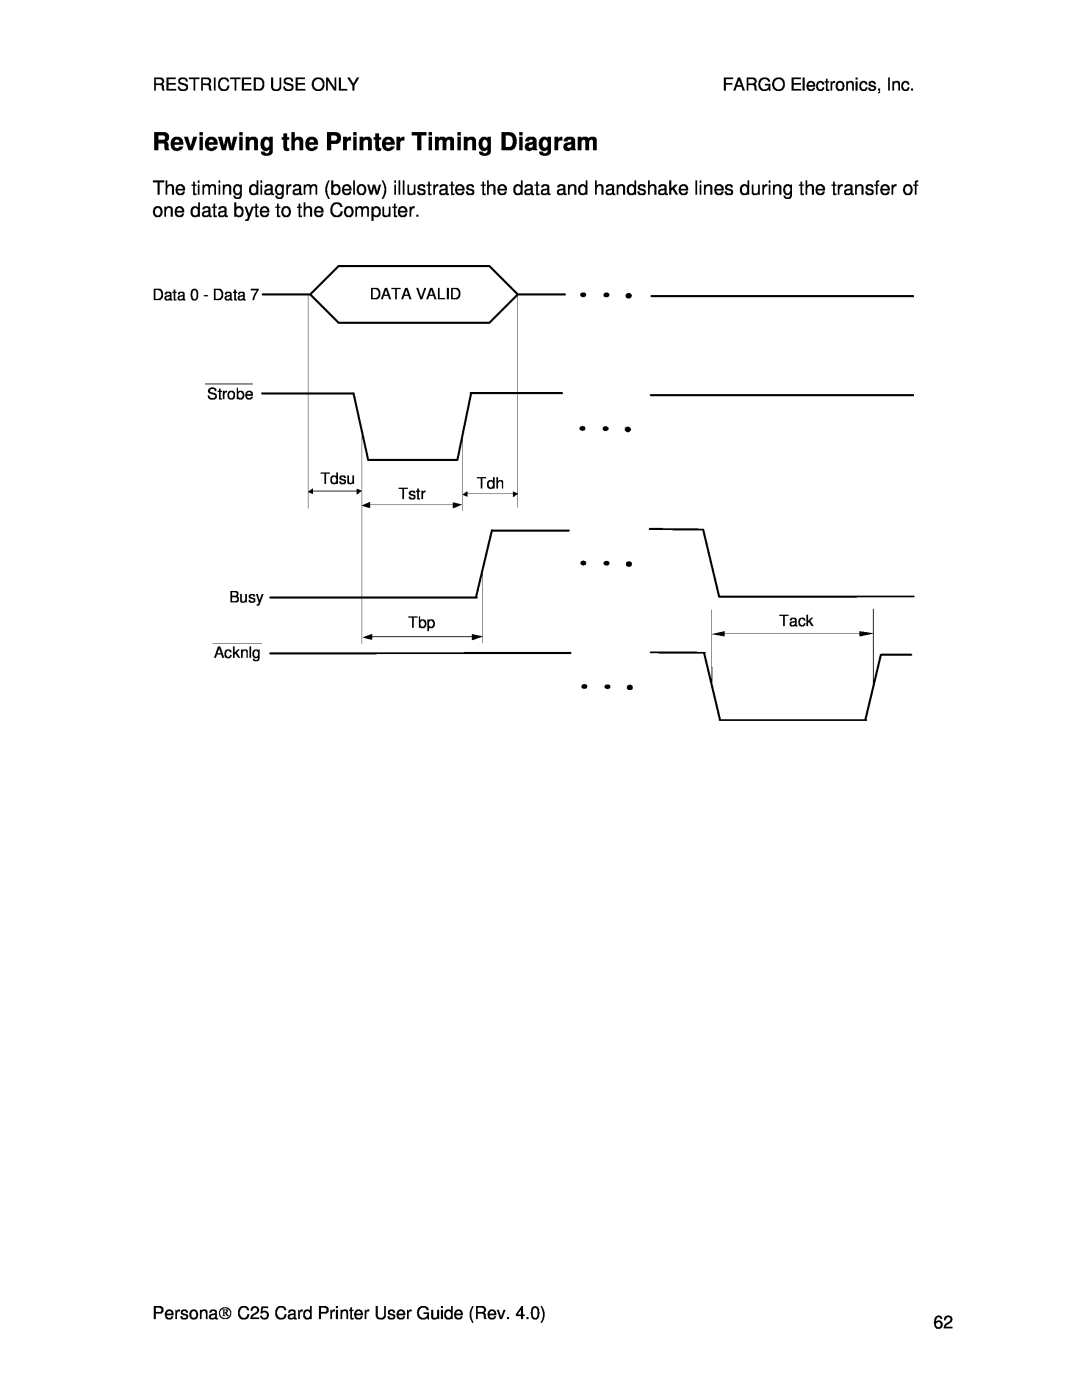 FARGO electronic S000256 manual Reviewing the Printer Timing Diagram, Restricted Use Only, FARGO Electronics, Inc 